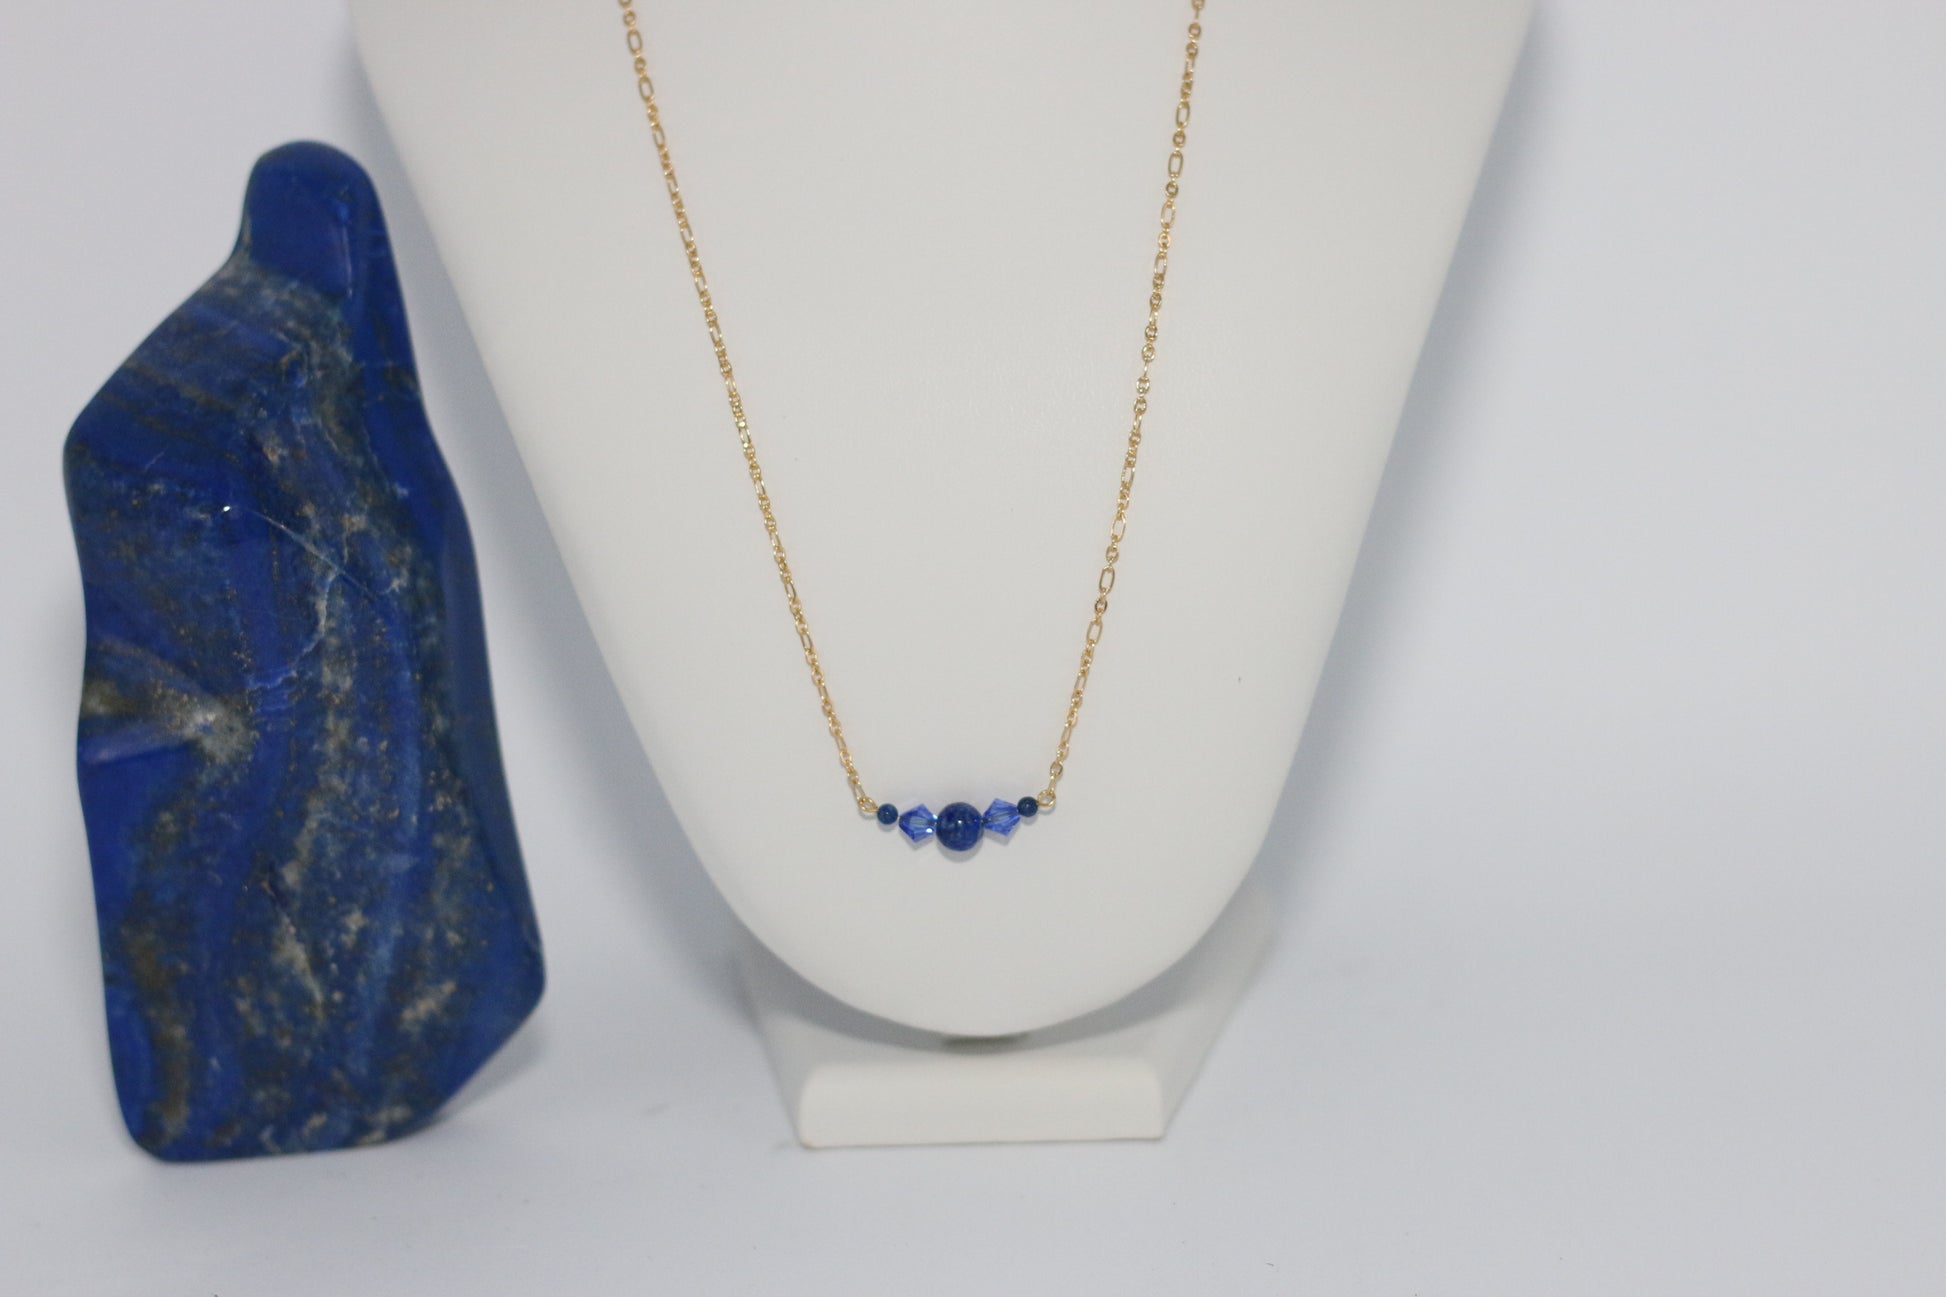 Lapis Blue Natural Gemstone with Sapphire Blue Austrian and Preciosa Czech Crystals 22" Figaro Chain Necklace with Gold Filled Components and 3" Extender Chain - Annabel's Jewelry & Leather